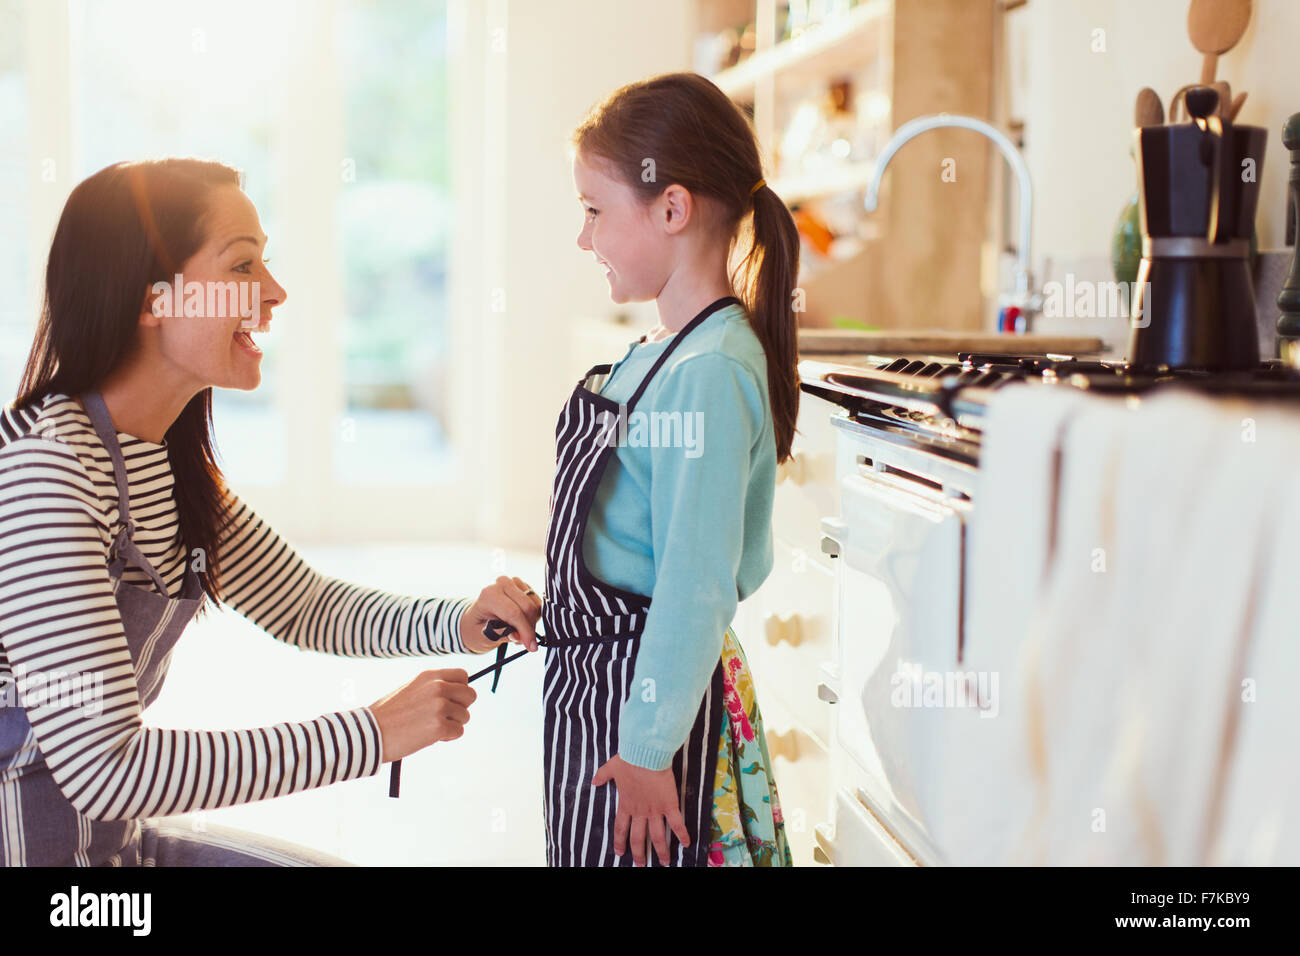 Mother tying apron on daughter in kitchen Stock Photo